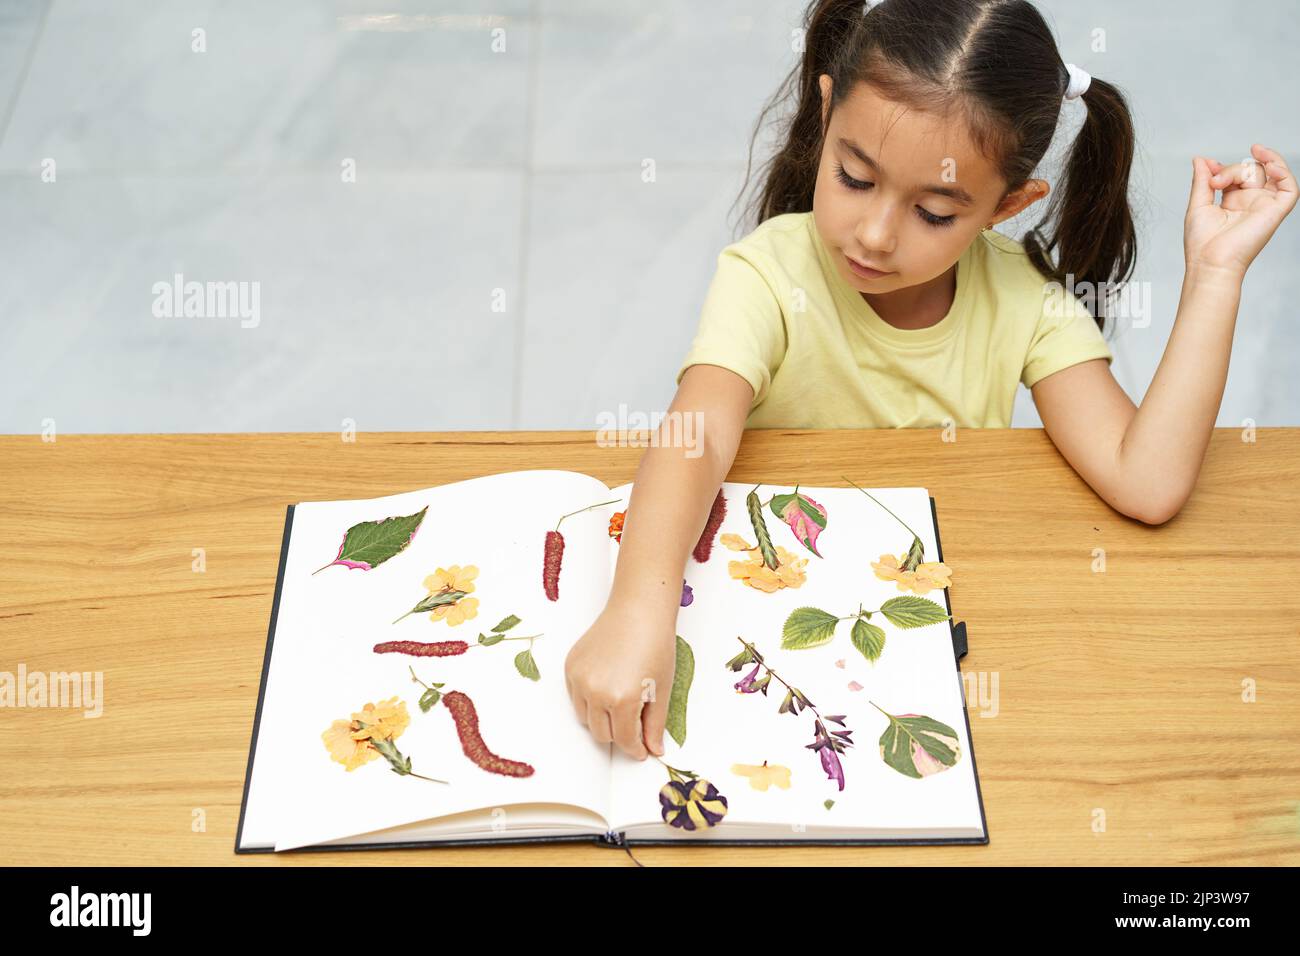 Child with dried flowers making herbarium on dining wood table in home. Dried pressed flowers view from above. Stock Photo